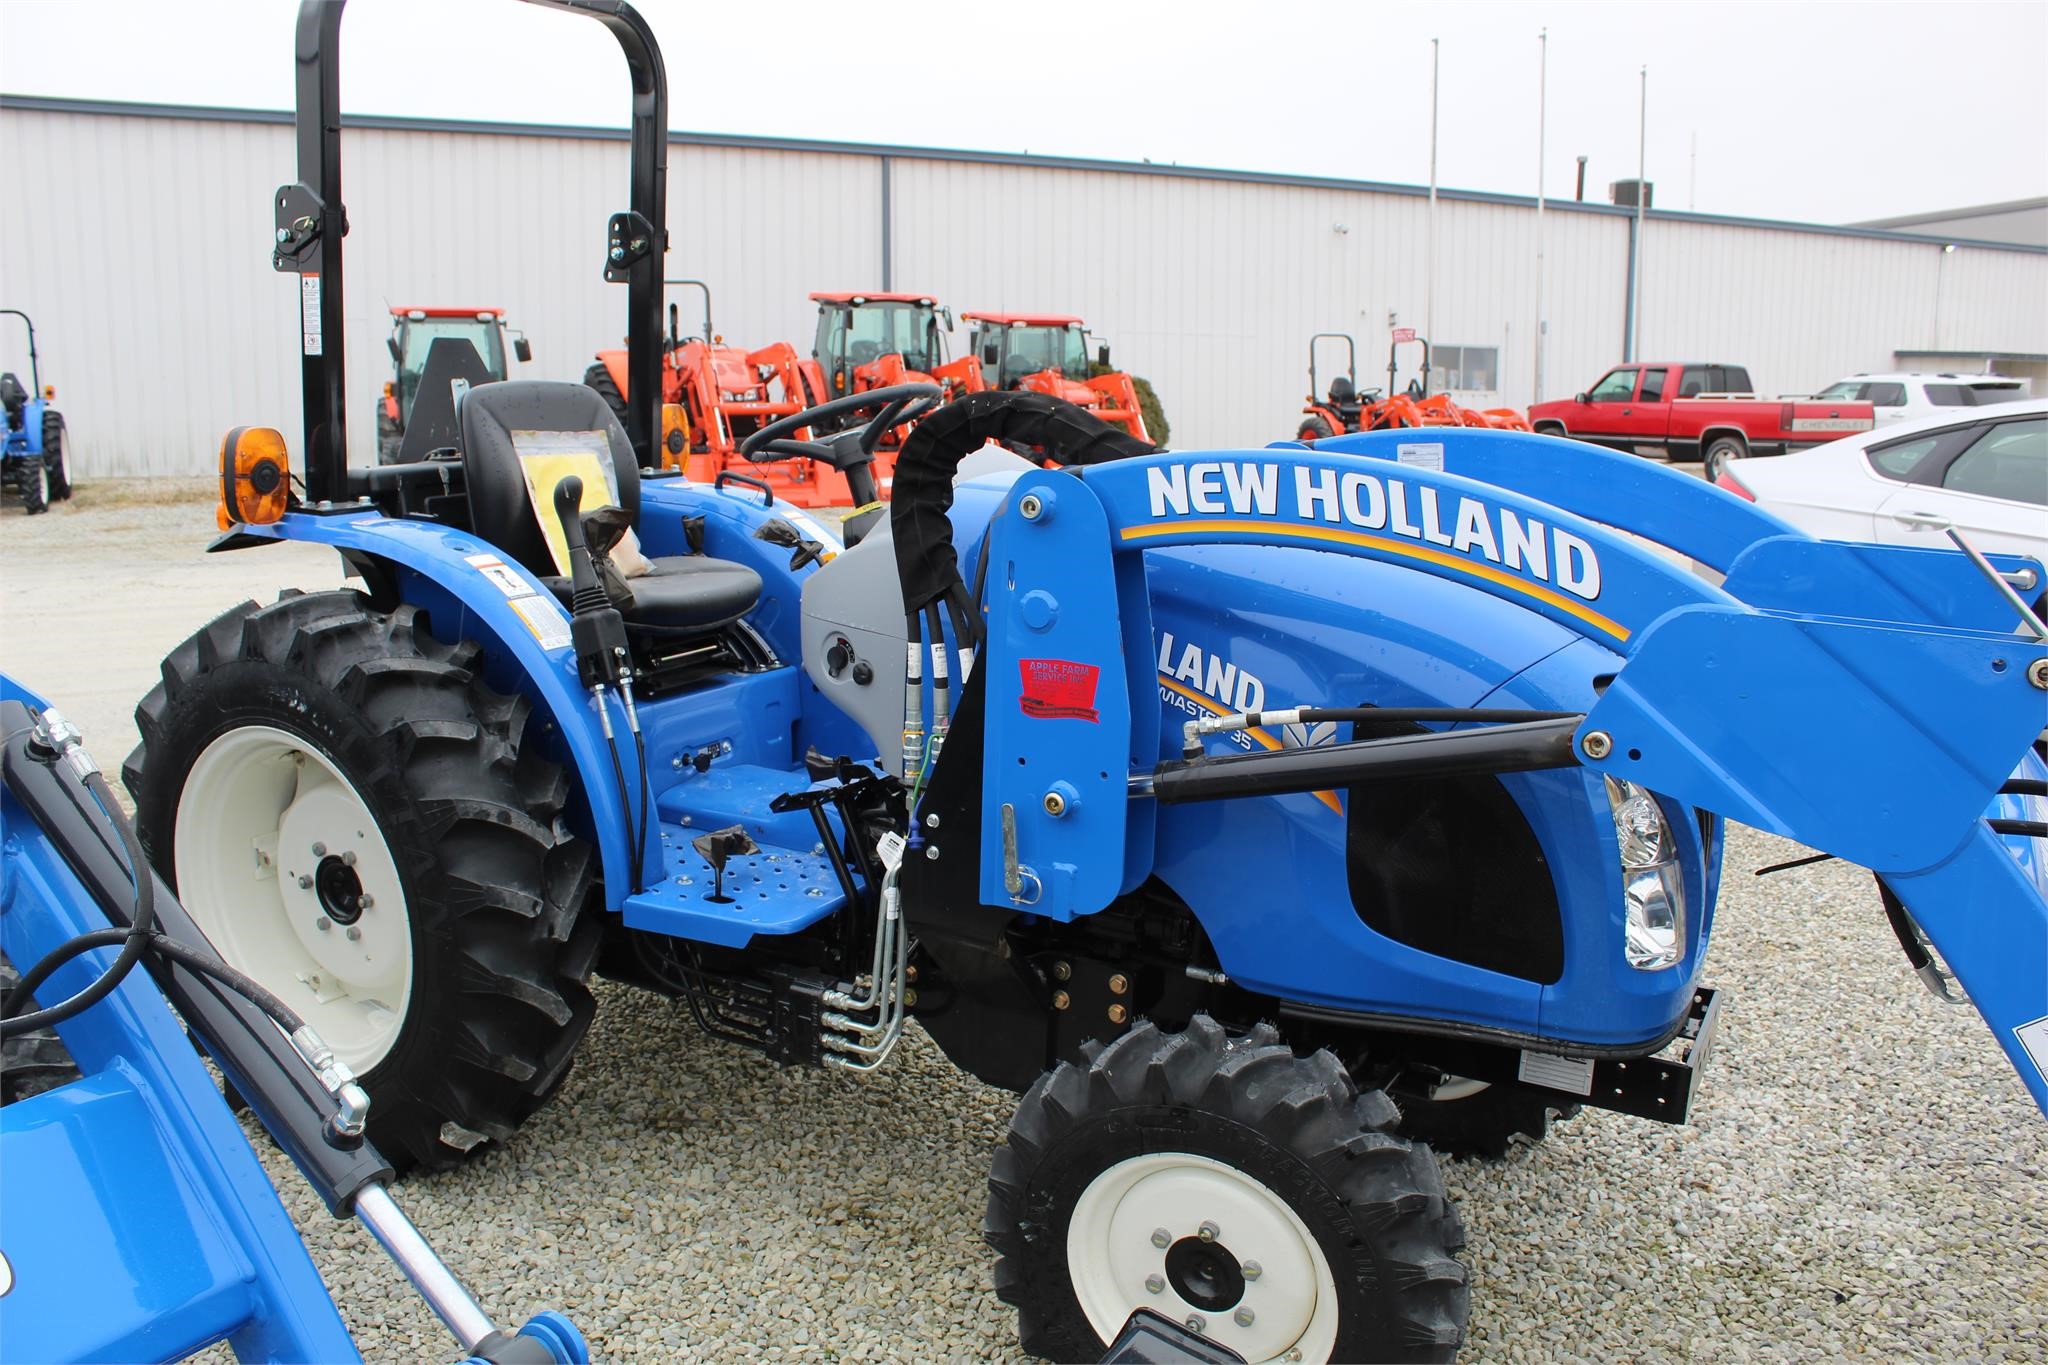 2020 NEW HOLLAND WORKMASTER 35 For Sale In Covington, Ohio